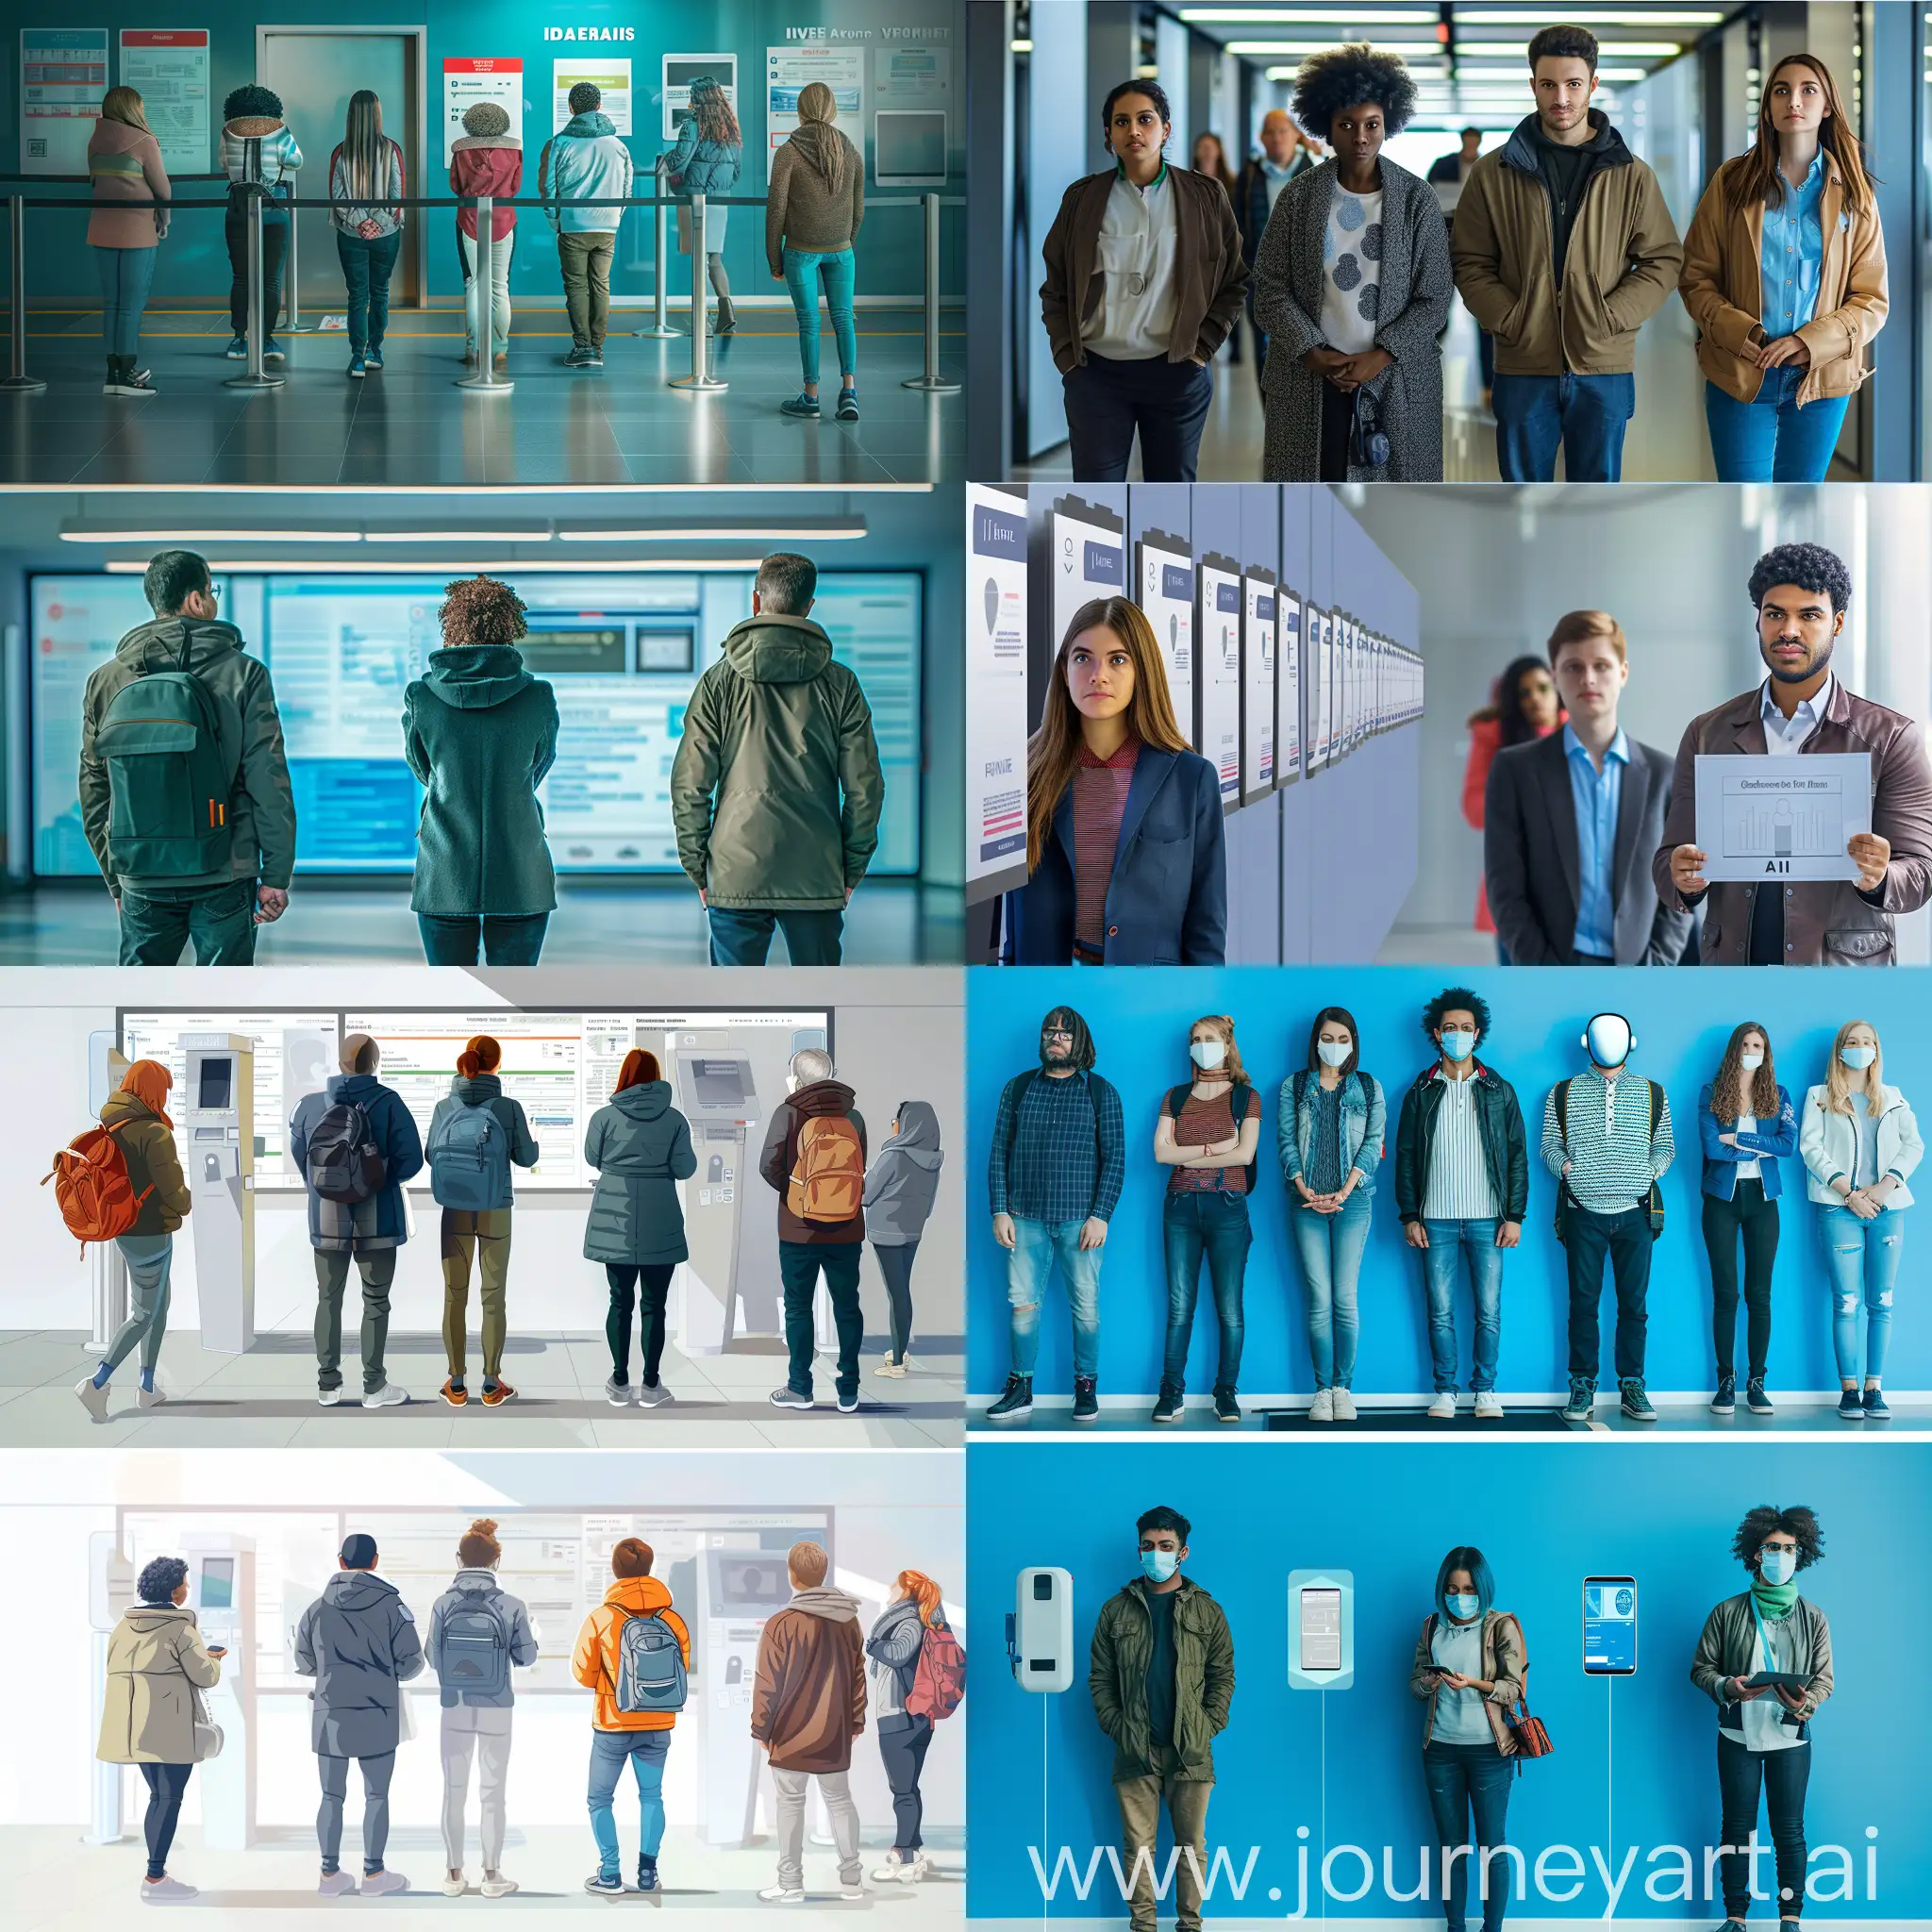 A split realistic image showcasing the current challenges: Top: Individuals facing difficulties with traditional identity verification processes (long lines, complex forms). Below: Individuals experiencing a smooth and streamlined digital identity experience facilitated by AI (biometric verification, online services).